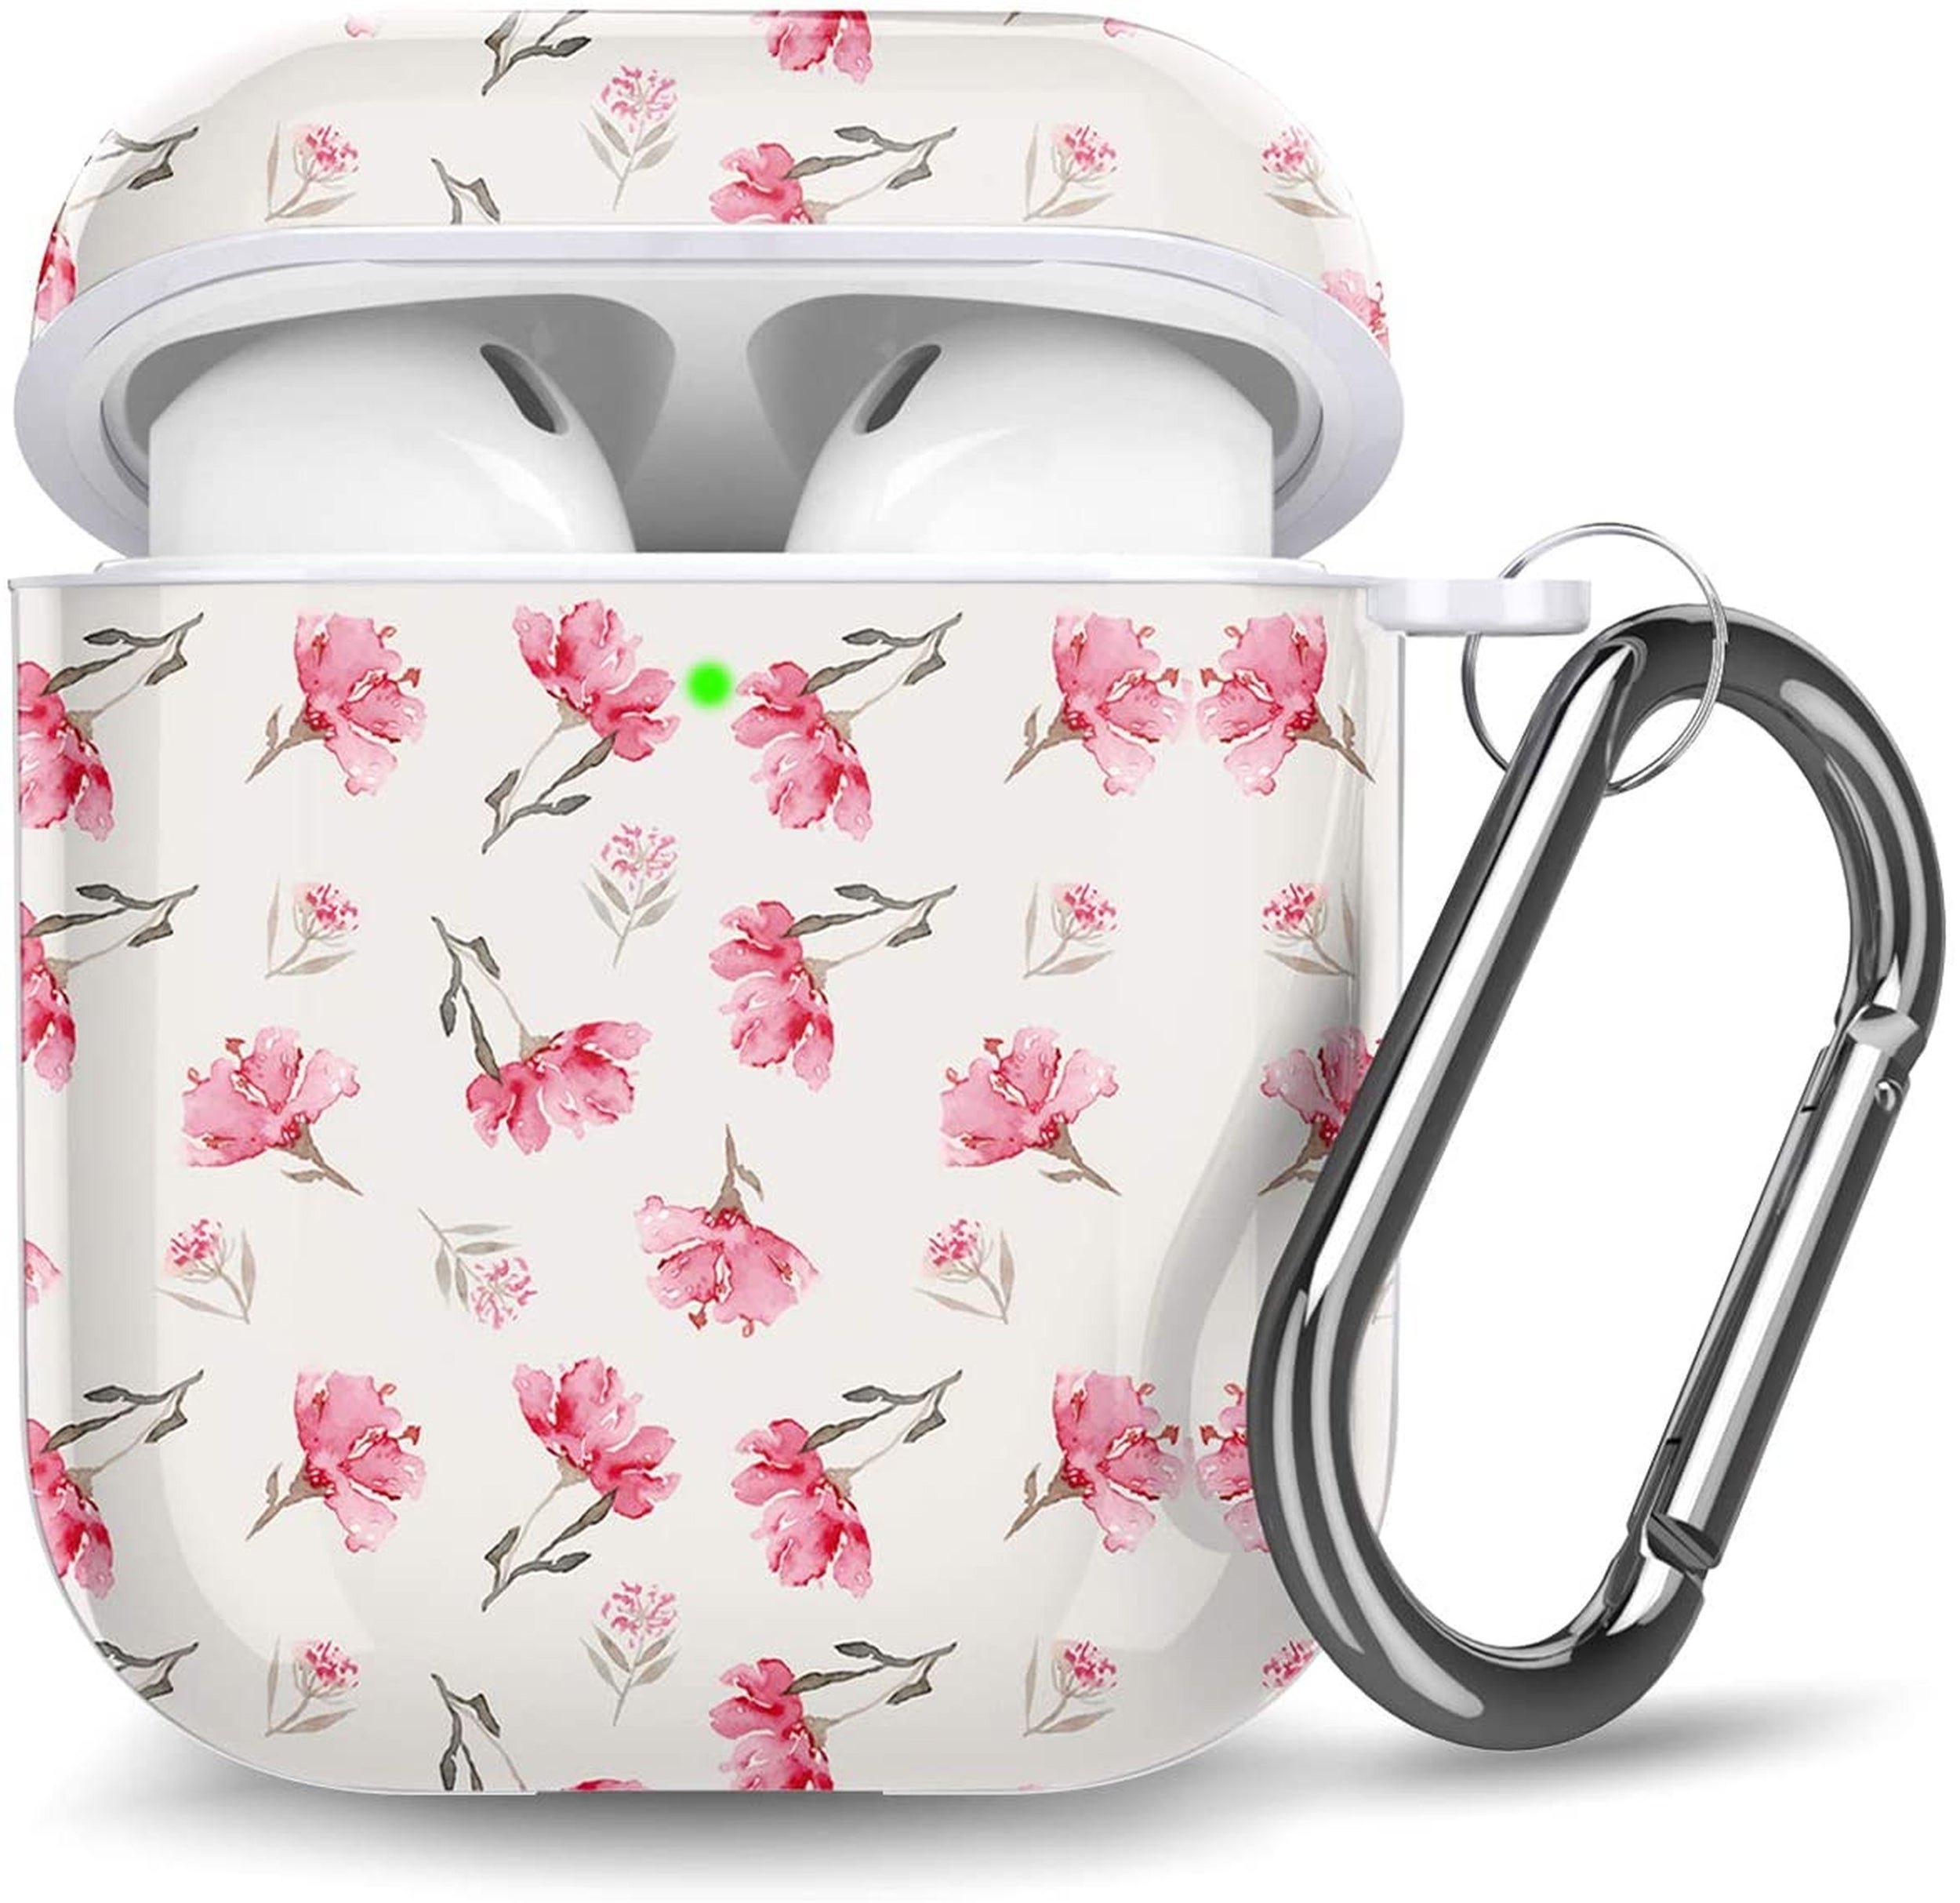 Floral Airpods case cover (Amazon/PA)